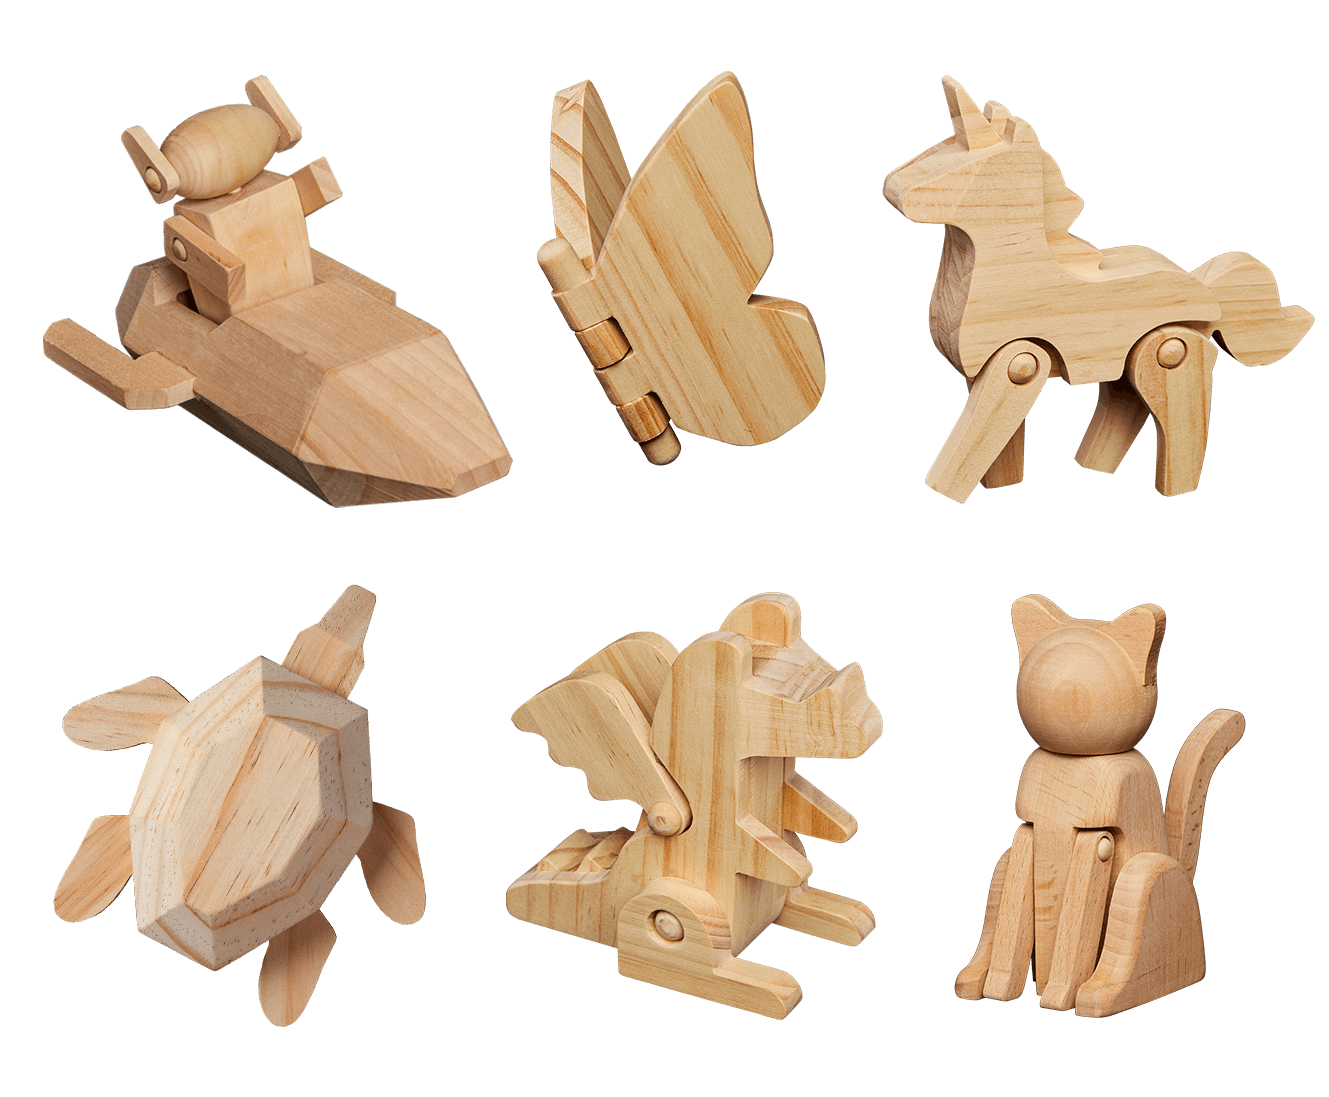 6 Wooden Figurines designed by Cat Hong for Smarts & Crafts. They are the Alien Explorer, Butterfly, Unicorn, Turtle, Dragon, and Cat